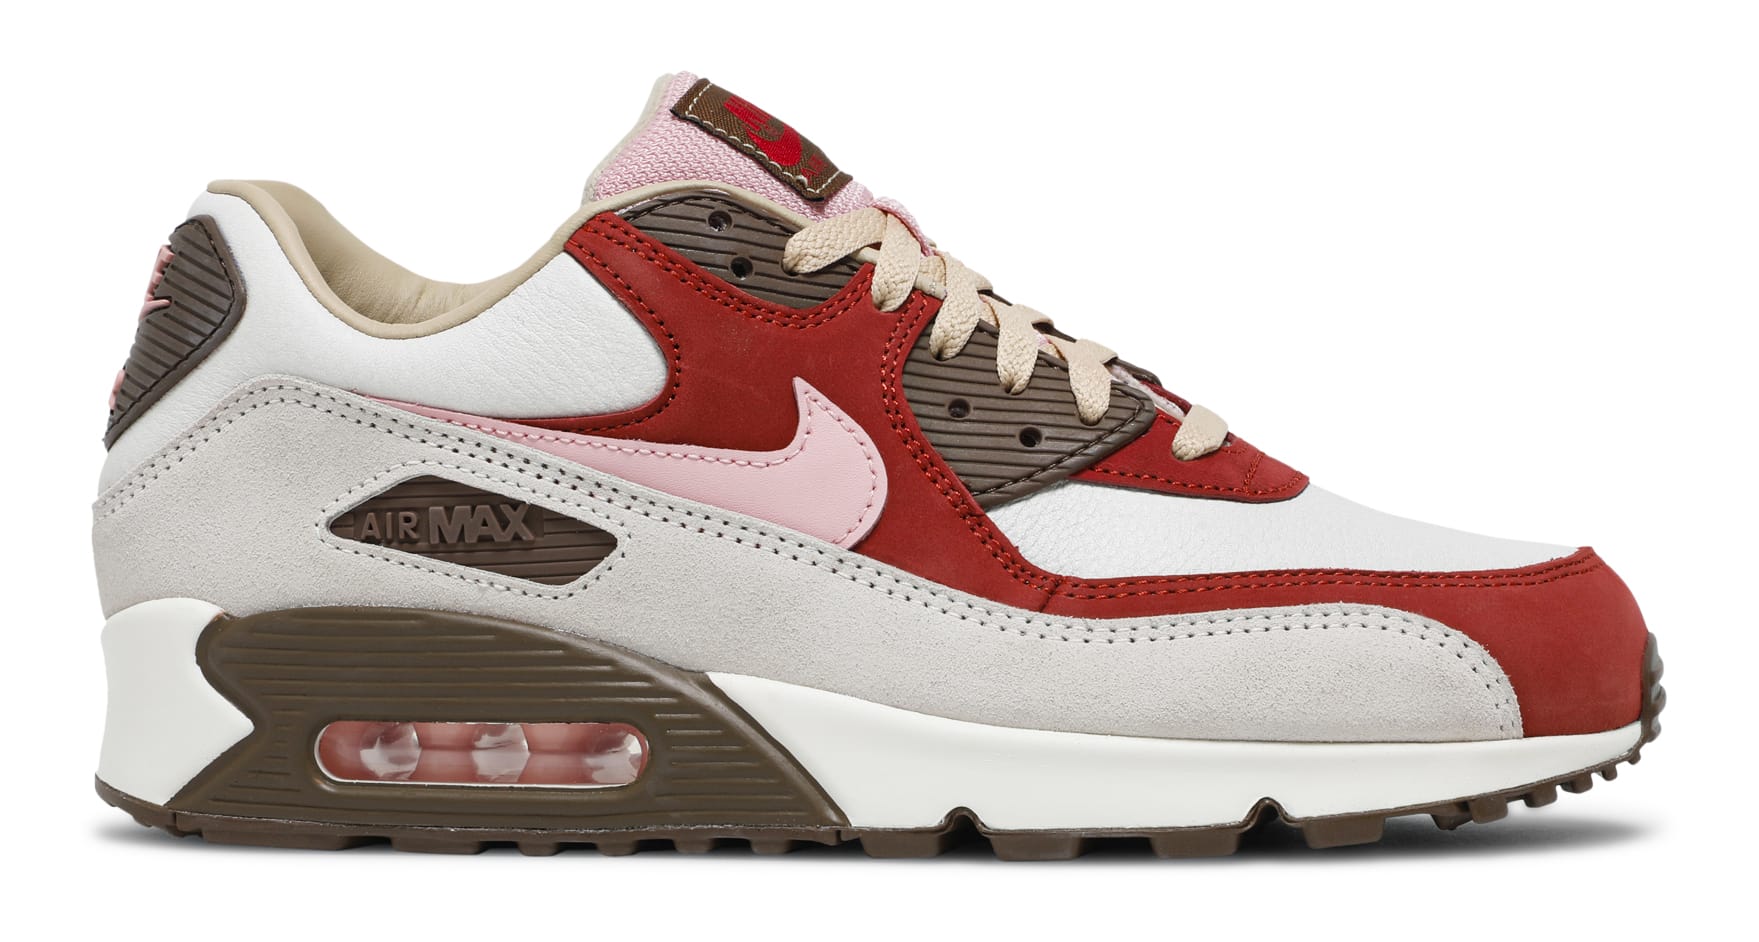 GOAT Air Max 90 Bacon side